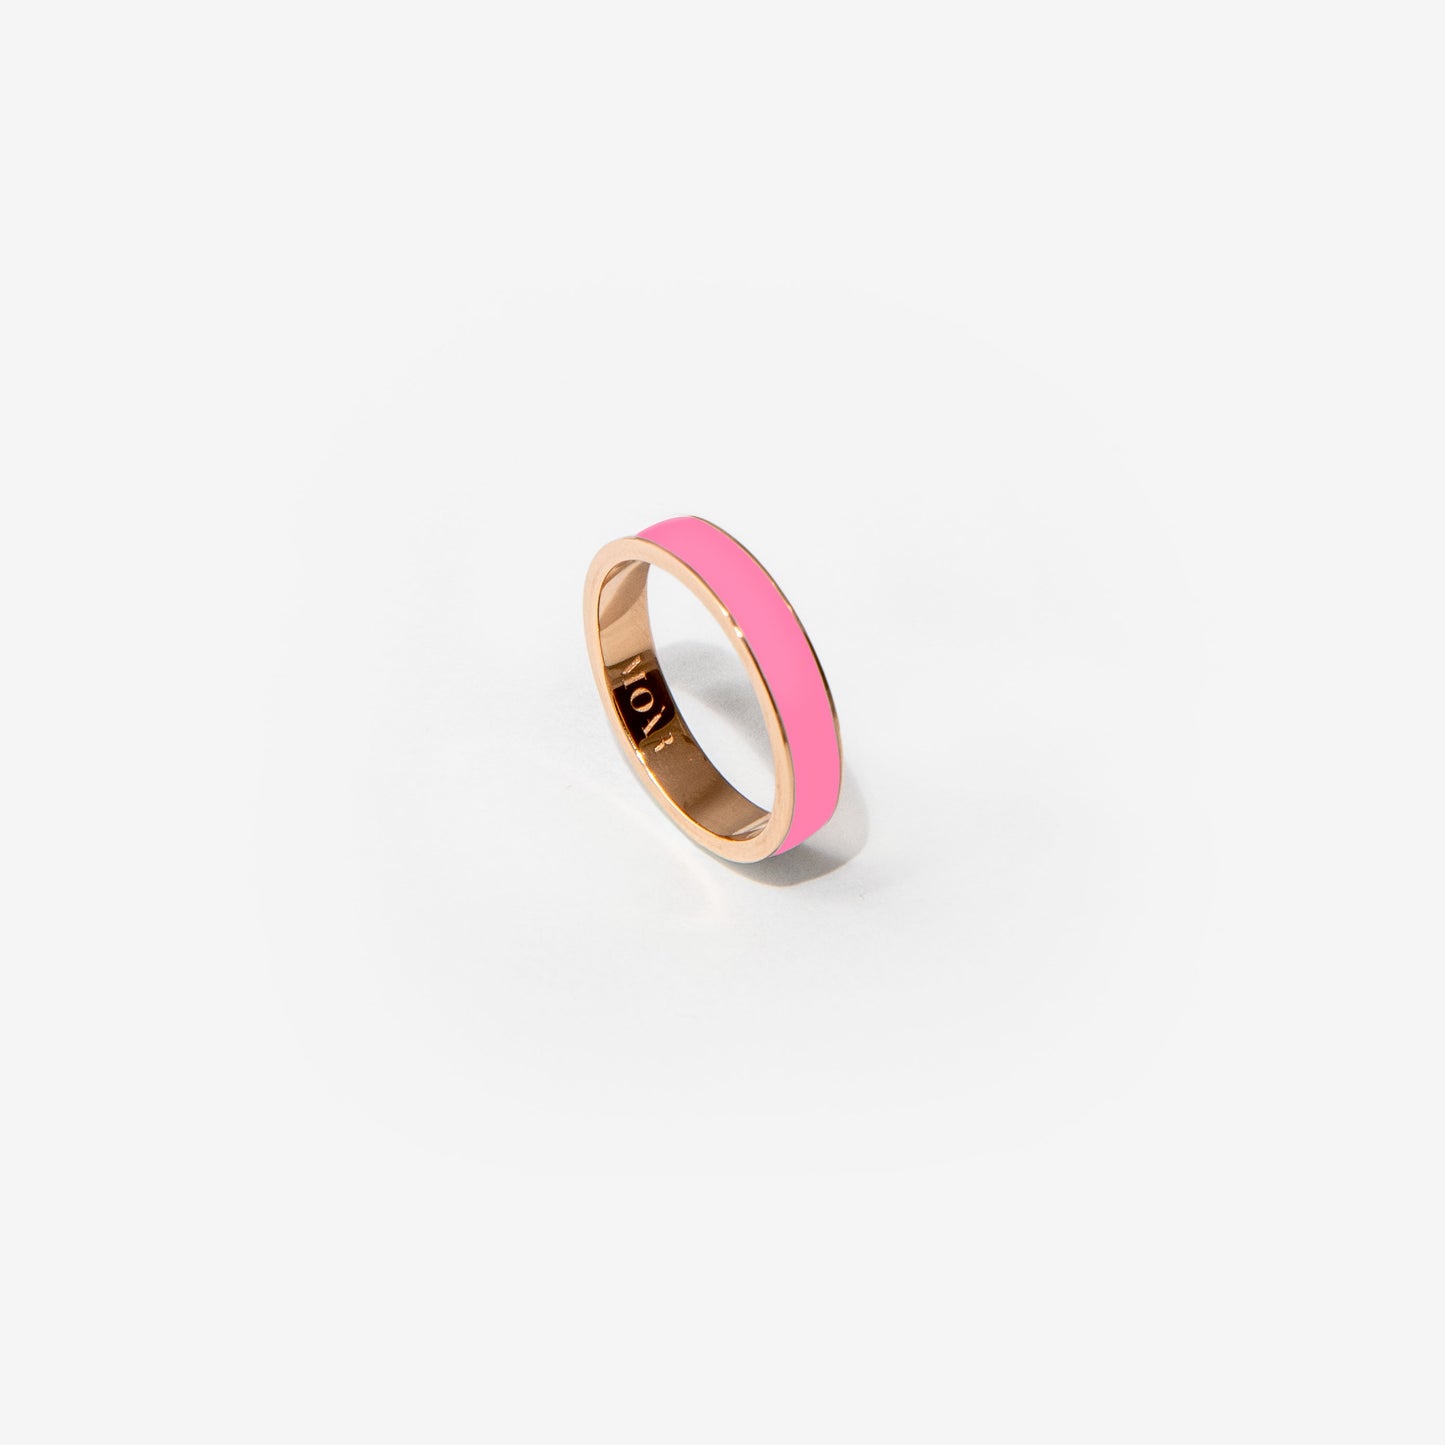 Rose gold and neon pink enamel veretta